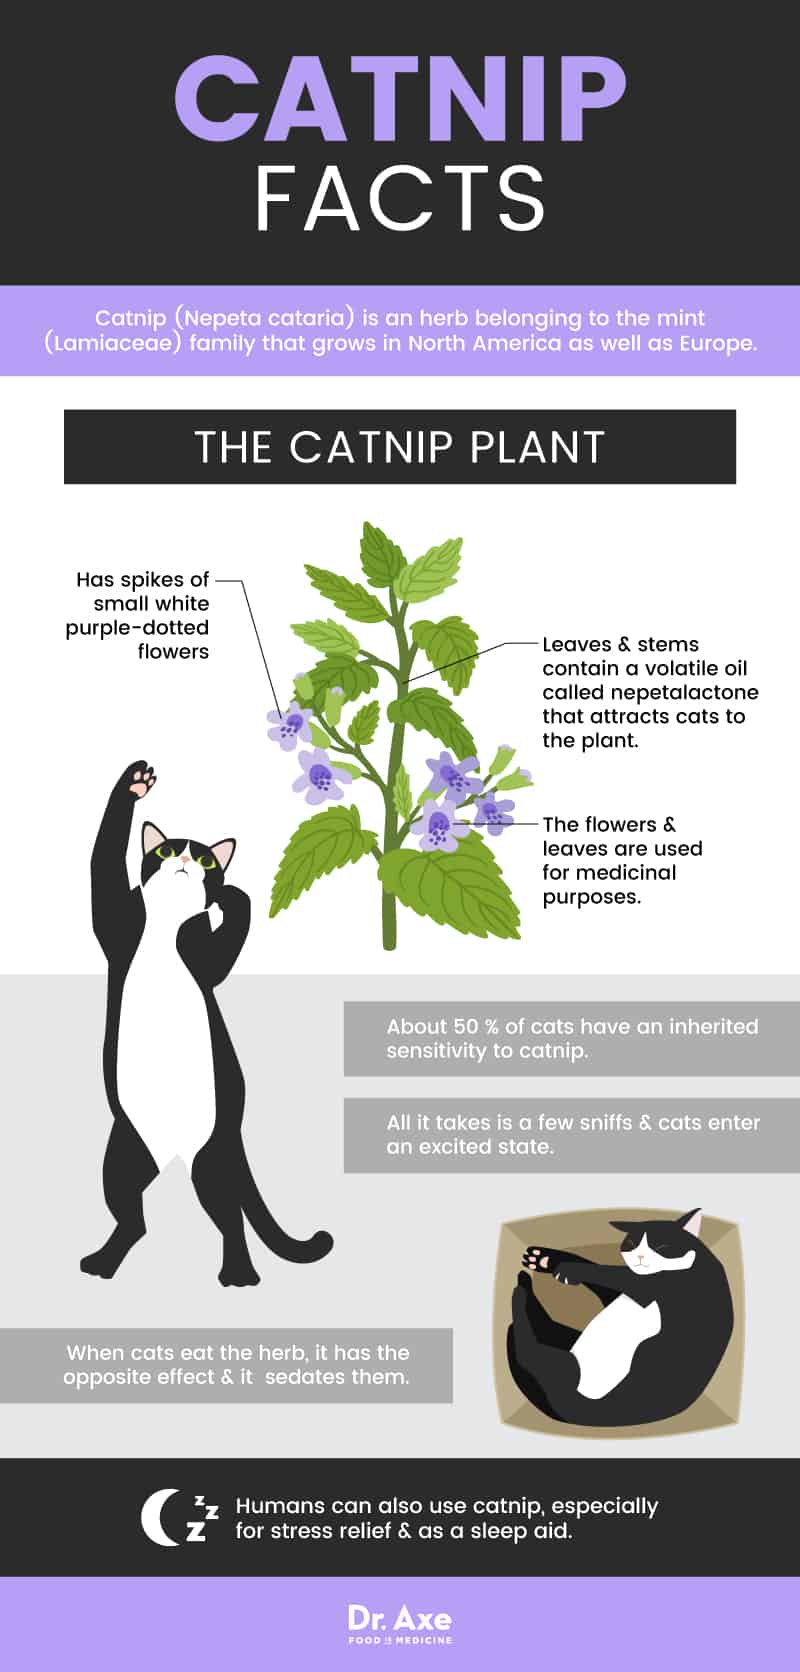 Catnip facts - Dr. Axe